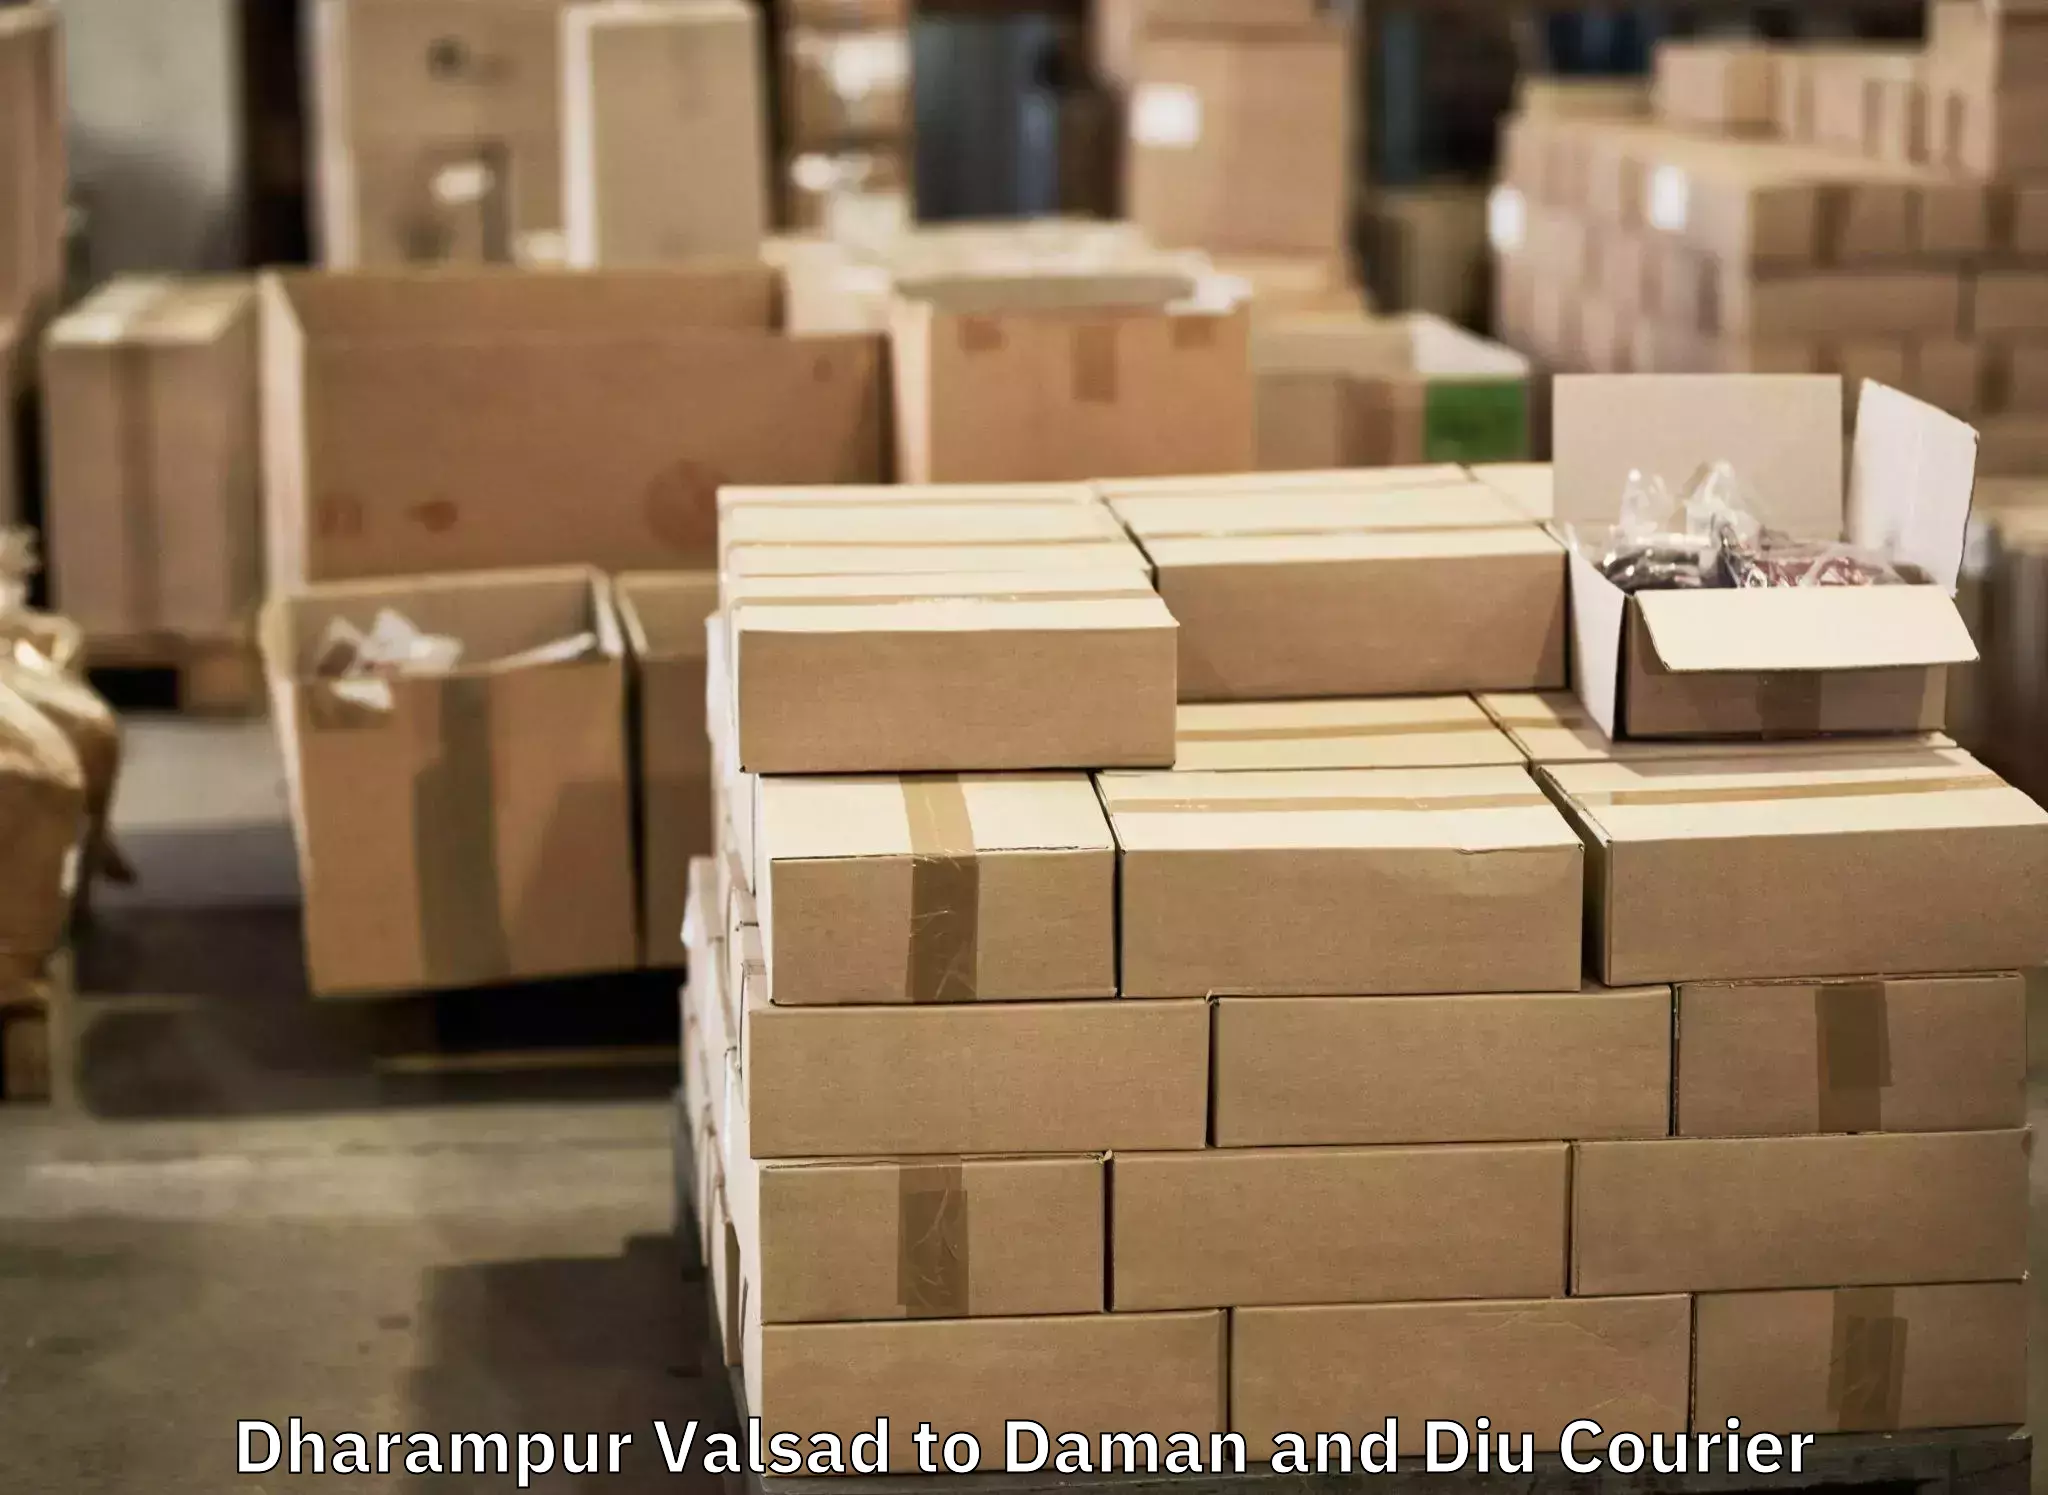 Luggage transport company Dharampur Valsad to Daman and Diu